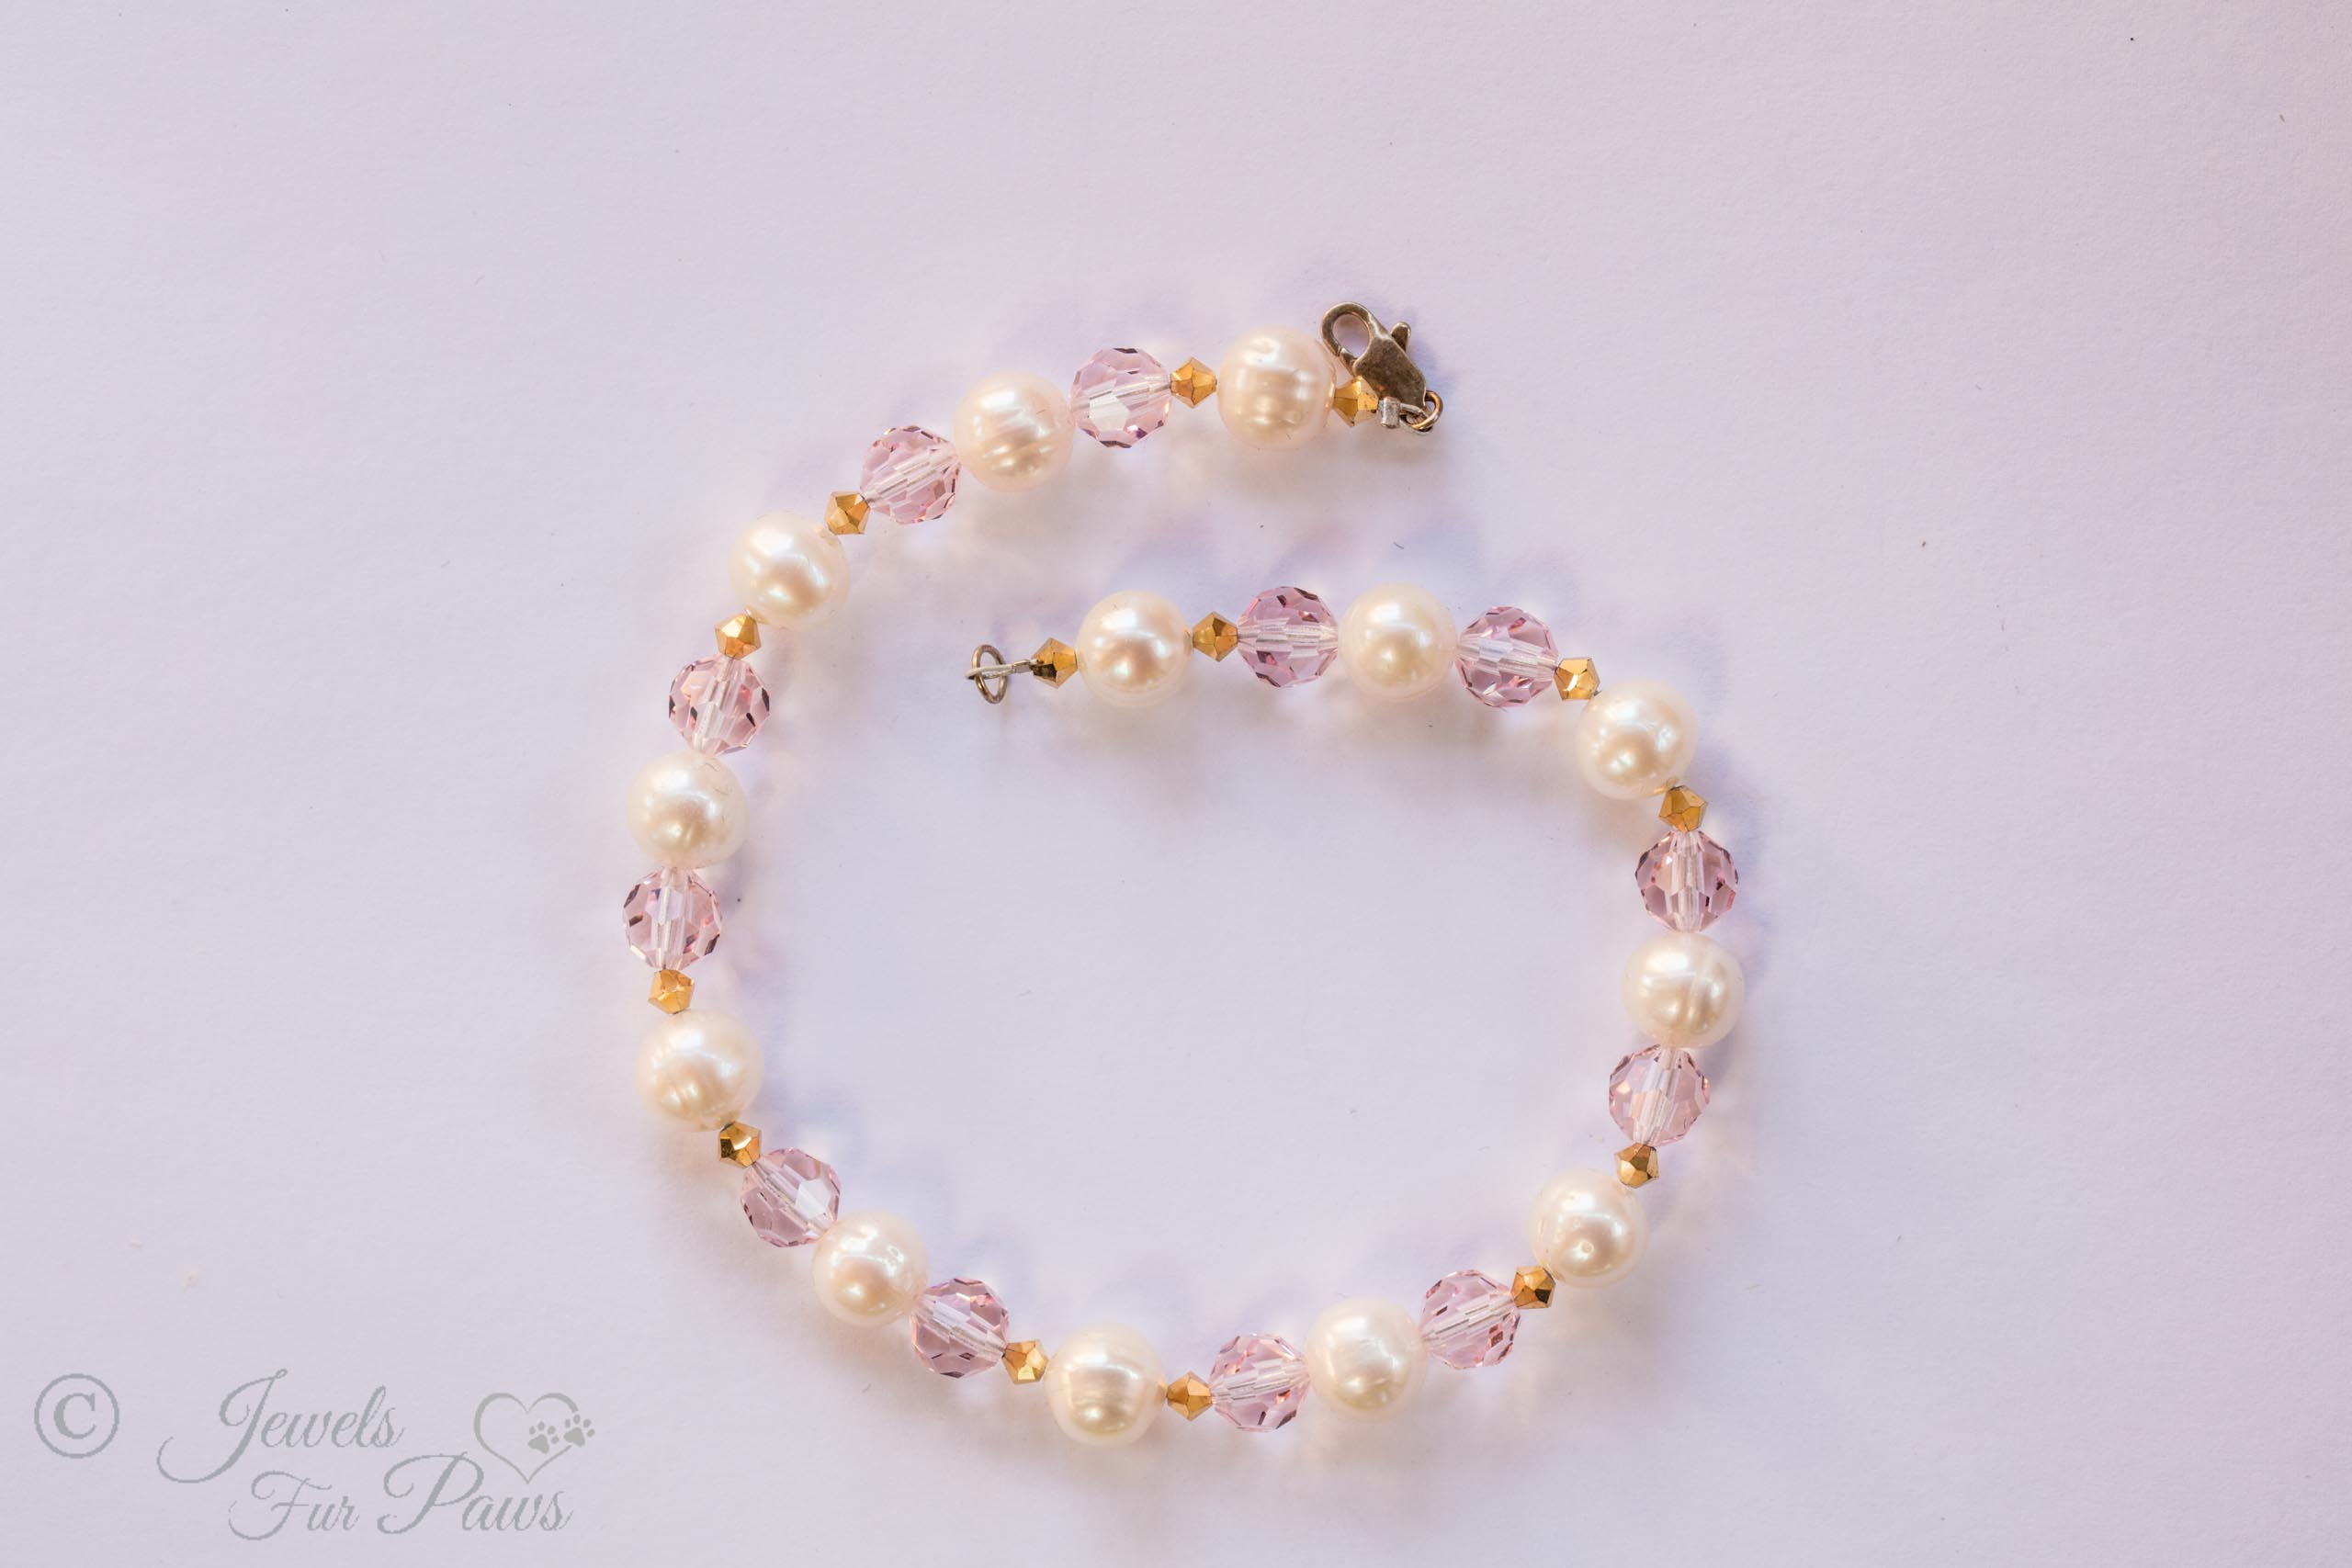 thirteen cultured pearls strung with pale pink Czech crystals and amber crystal spacers